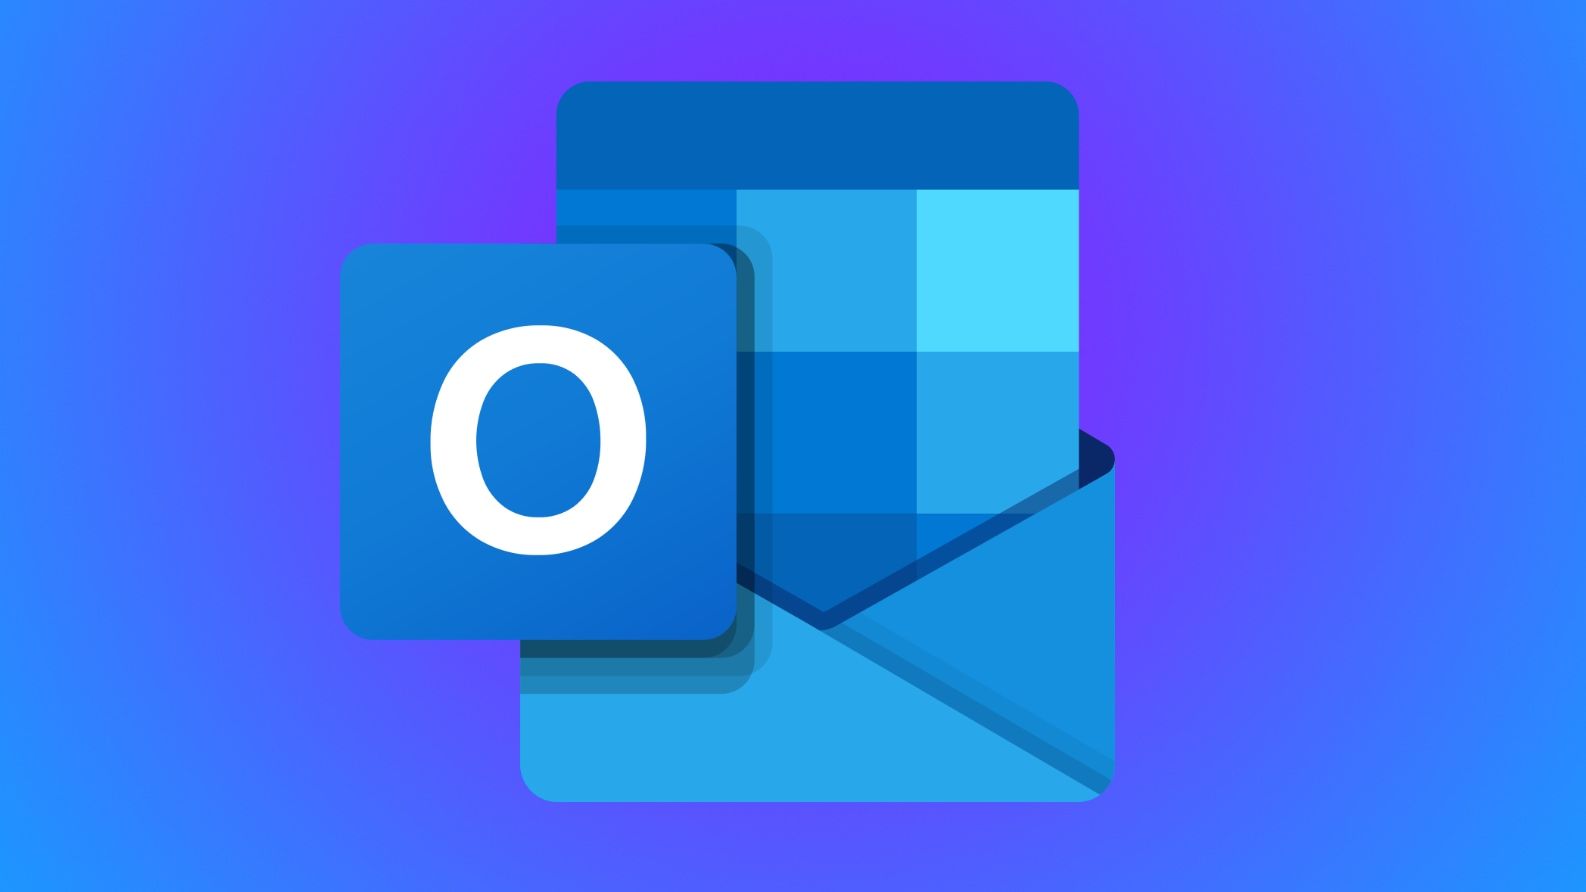 Outlook logo with colored background